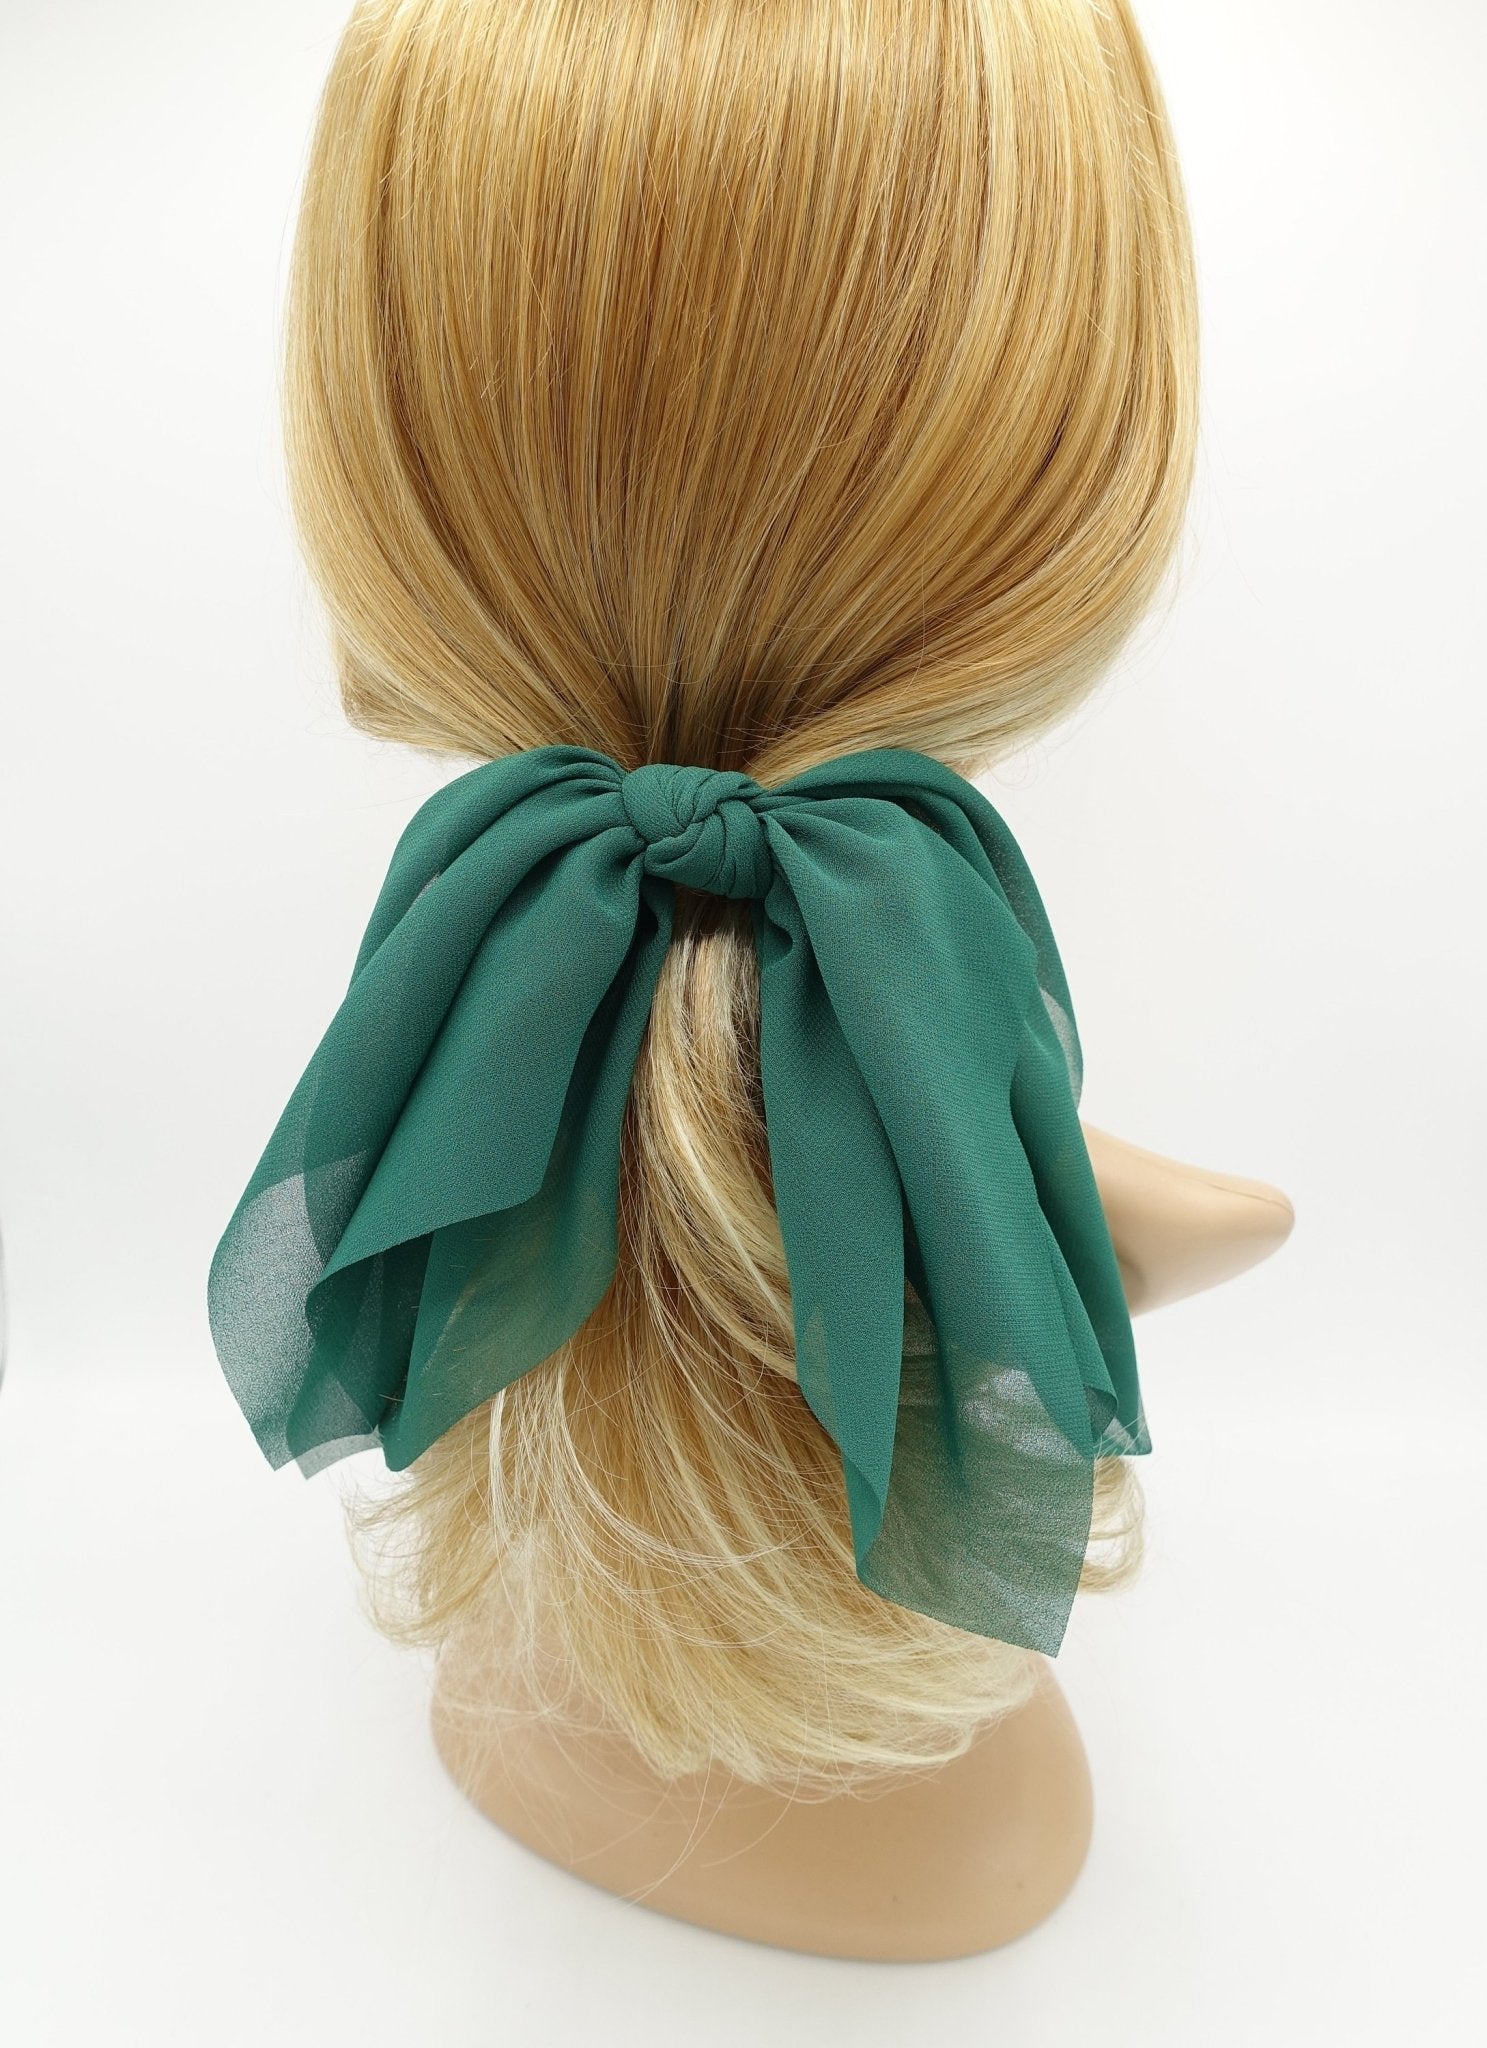 VeryShine chiffon layered hair bow solid color drape feminine style hair knotted bow french hair barrette